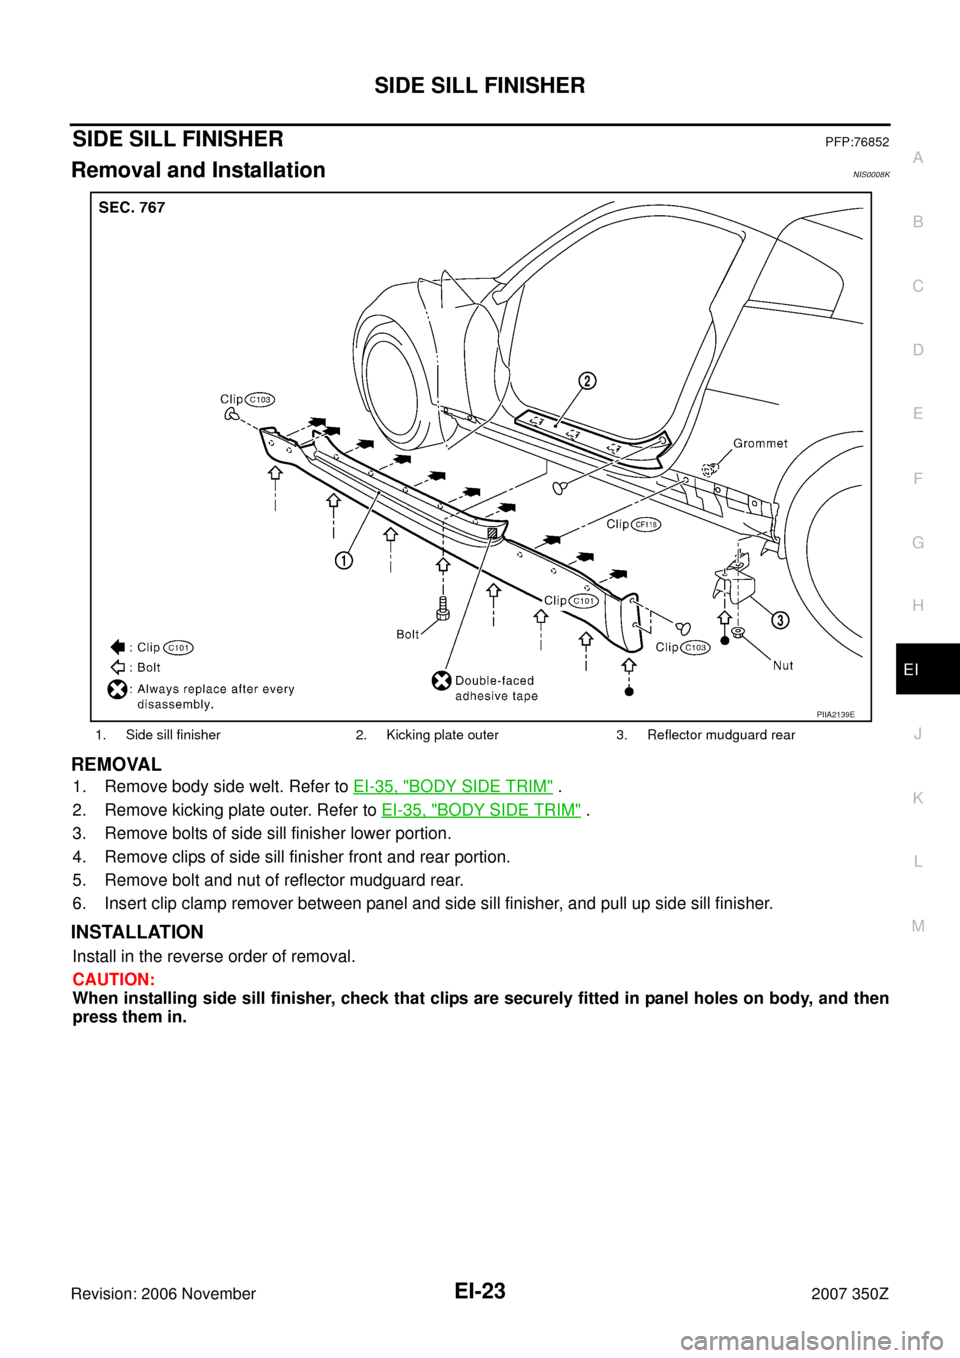 NISSAN 350Z 2007 Z33 Exterior And Interior Owners Manual SIDE SILL FINISHER
EI-23
C
D
E
F
G
H
J
K
L
MA
B
EI
Revision: 2006 November2007 350Z
SIDE SILL FINISHERPFP:76852
Removal and InstallationNIS0008K
REMOVAL
1. Remove body side welt. Refer to EI-35, "BODY